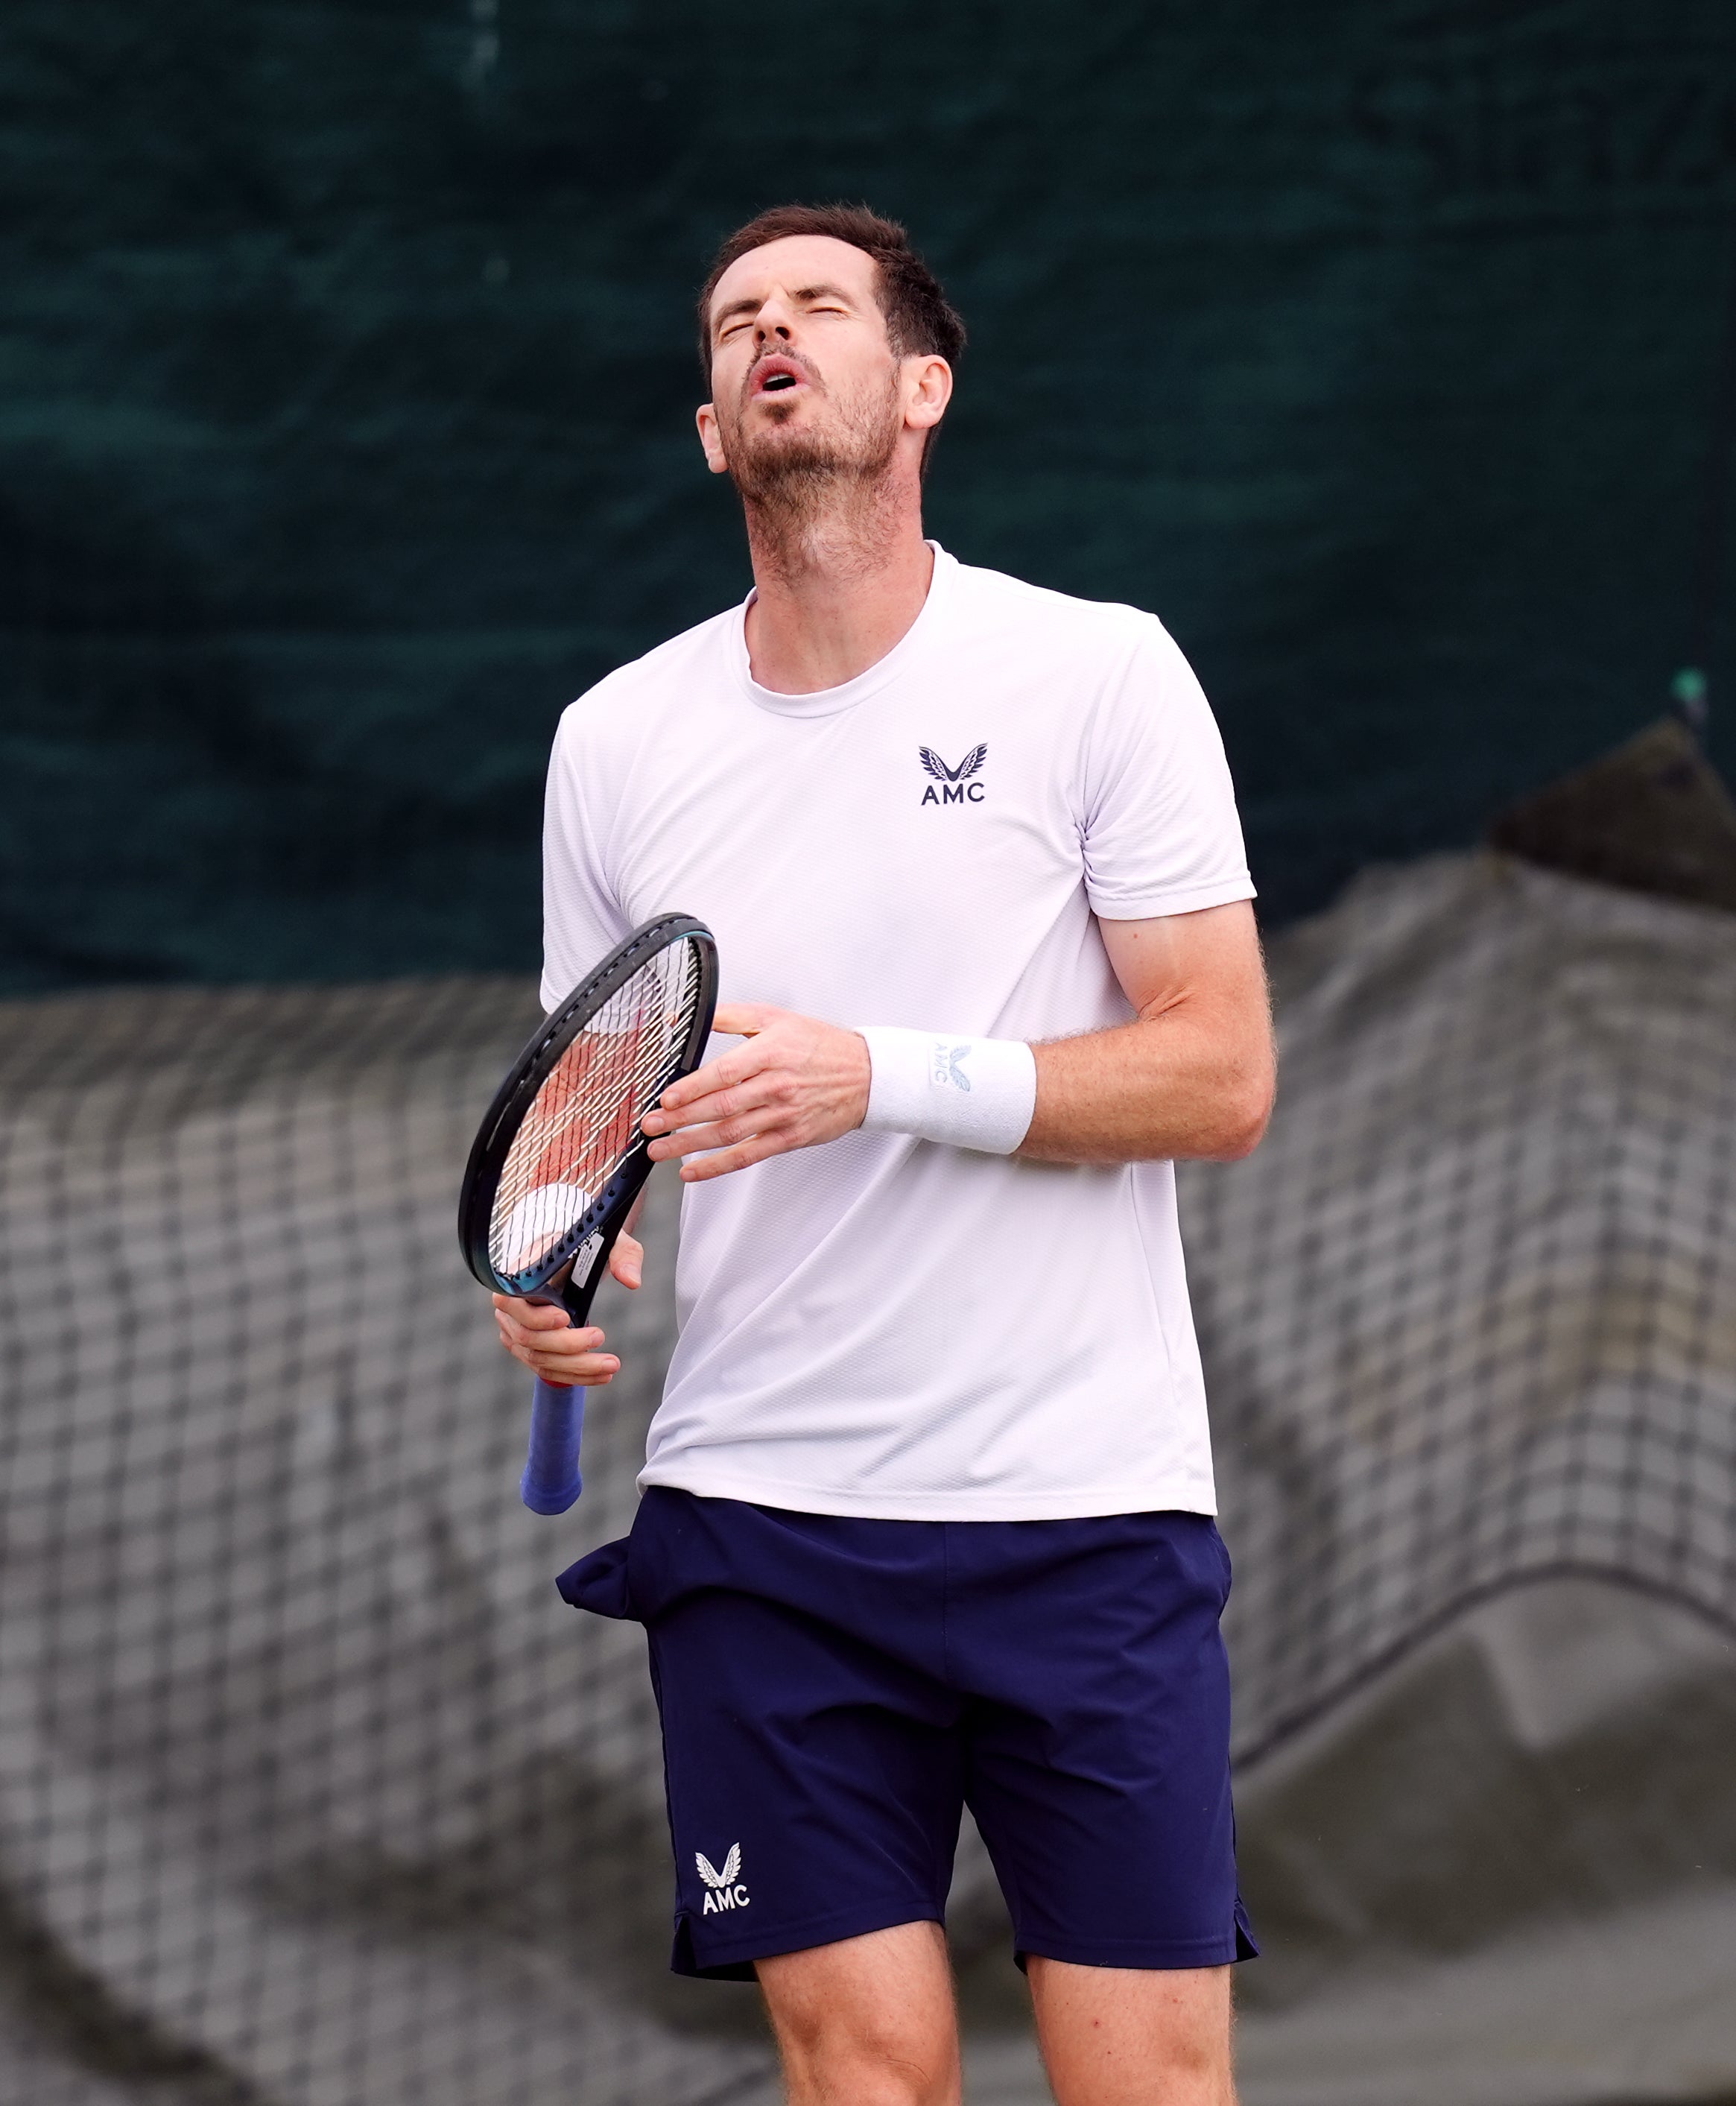 pa ready, andy murray, wimbledon, kyle edmund, centre court, british, all england club, bolton, fred perry, andy murray leaves wimbledon decision to the last minute